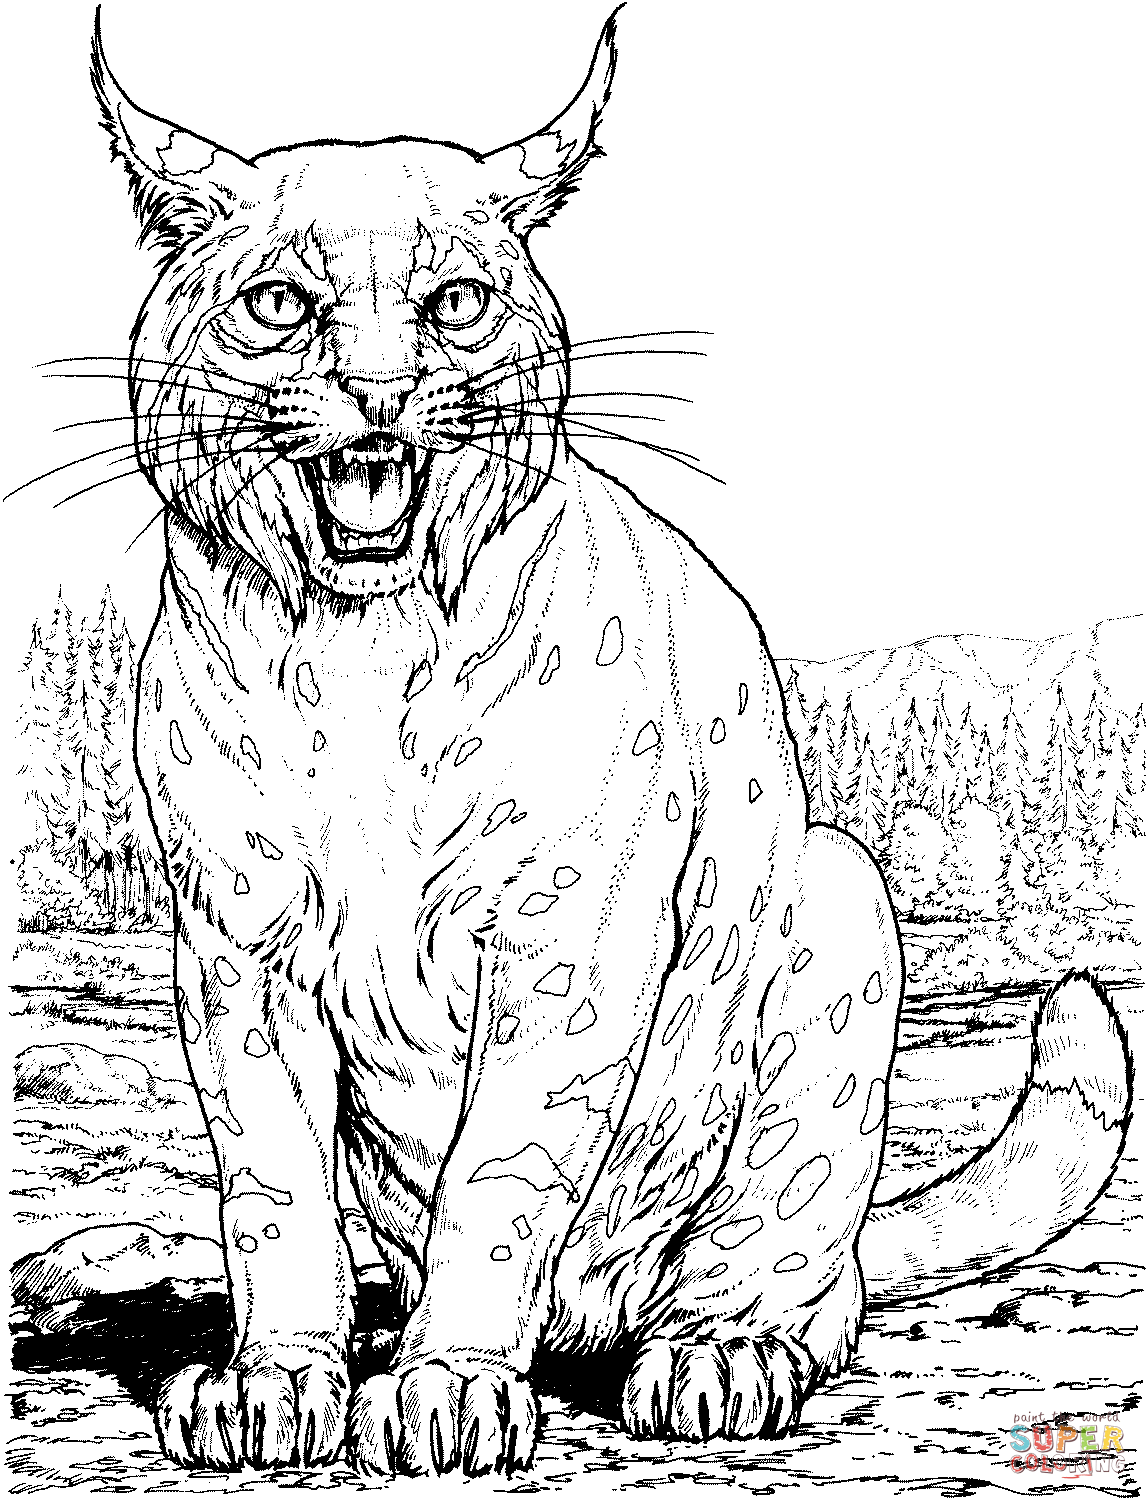 Lynx Cat coloring page | Free Printable ...